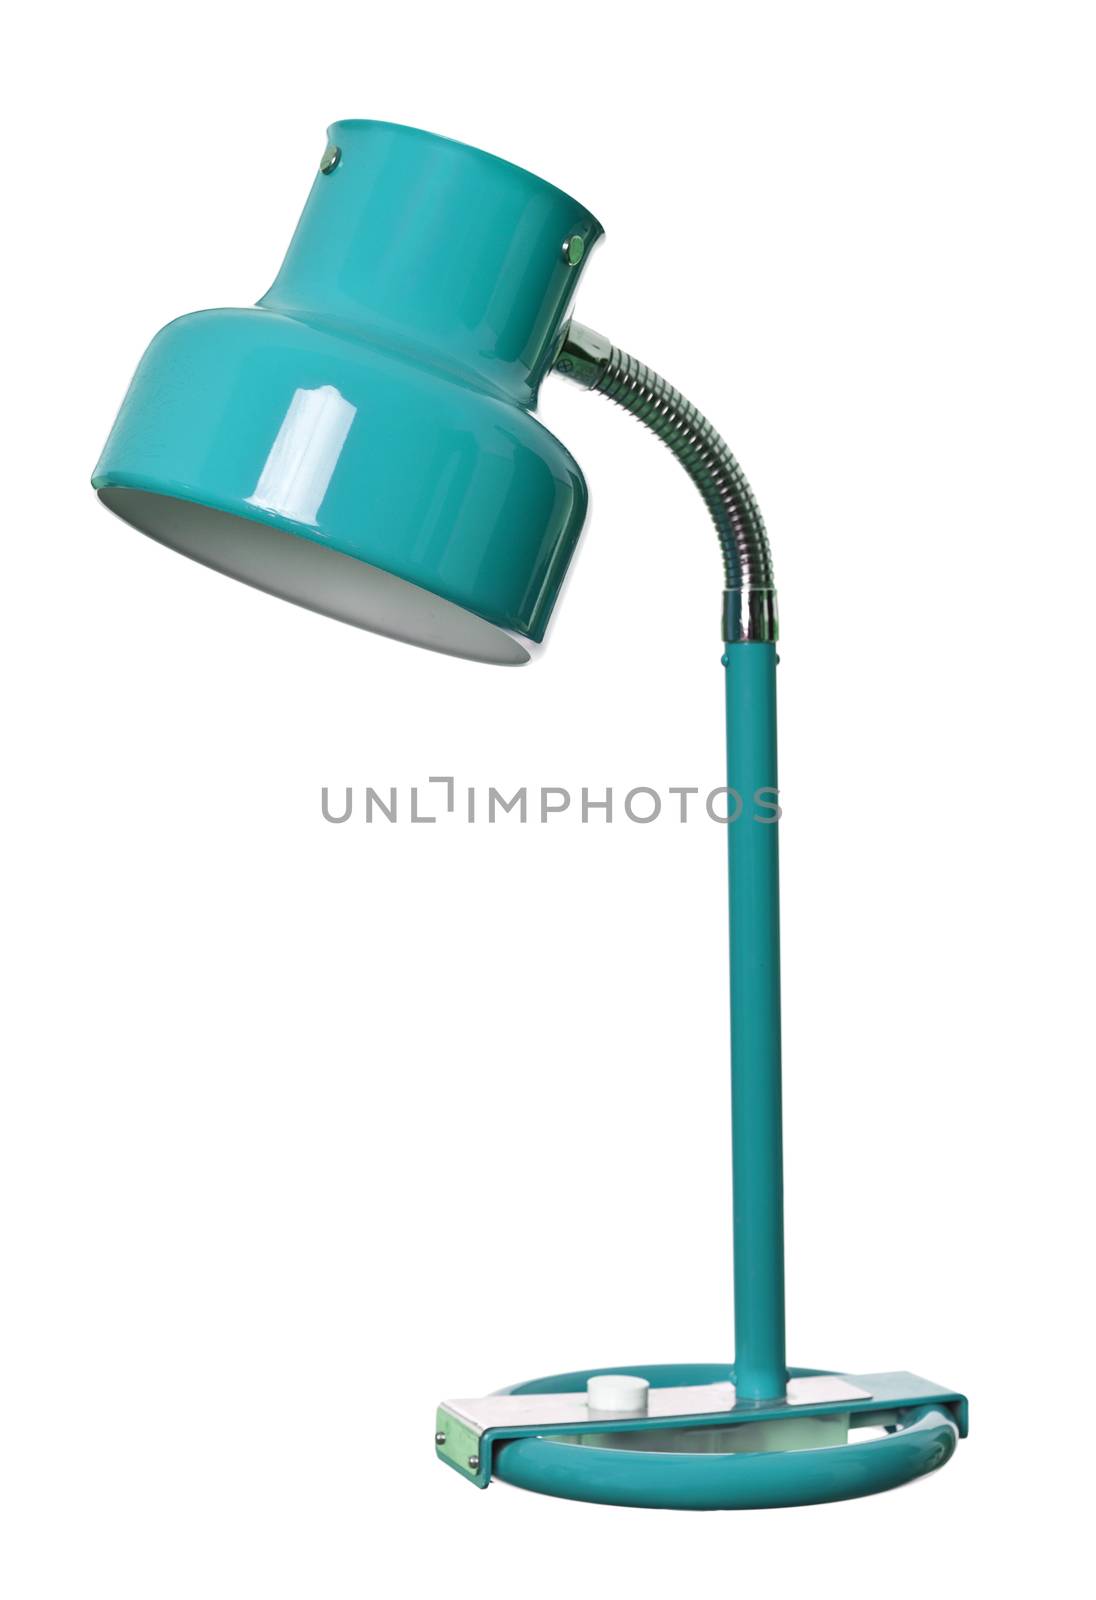 Old Blue lamp isolated on a white background